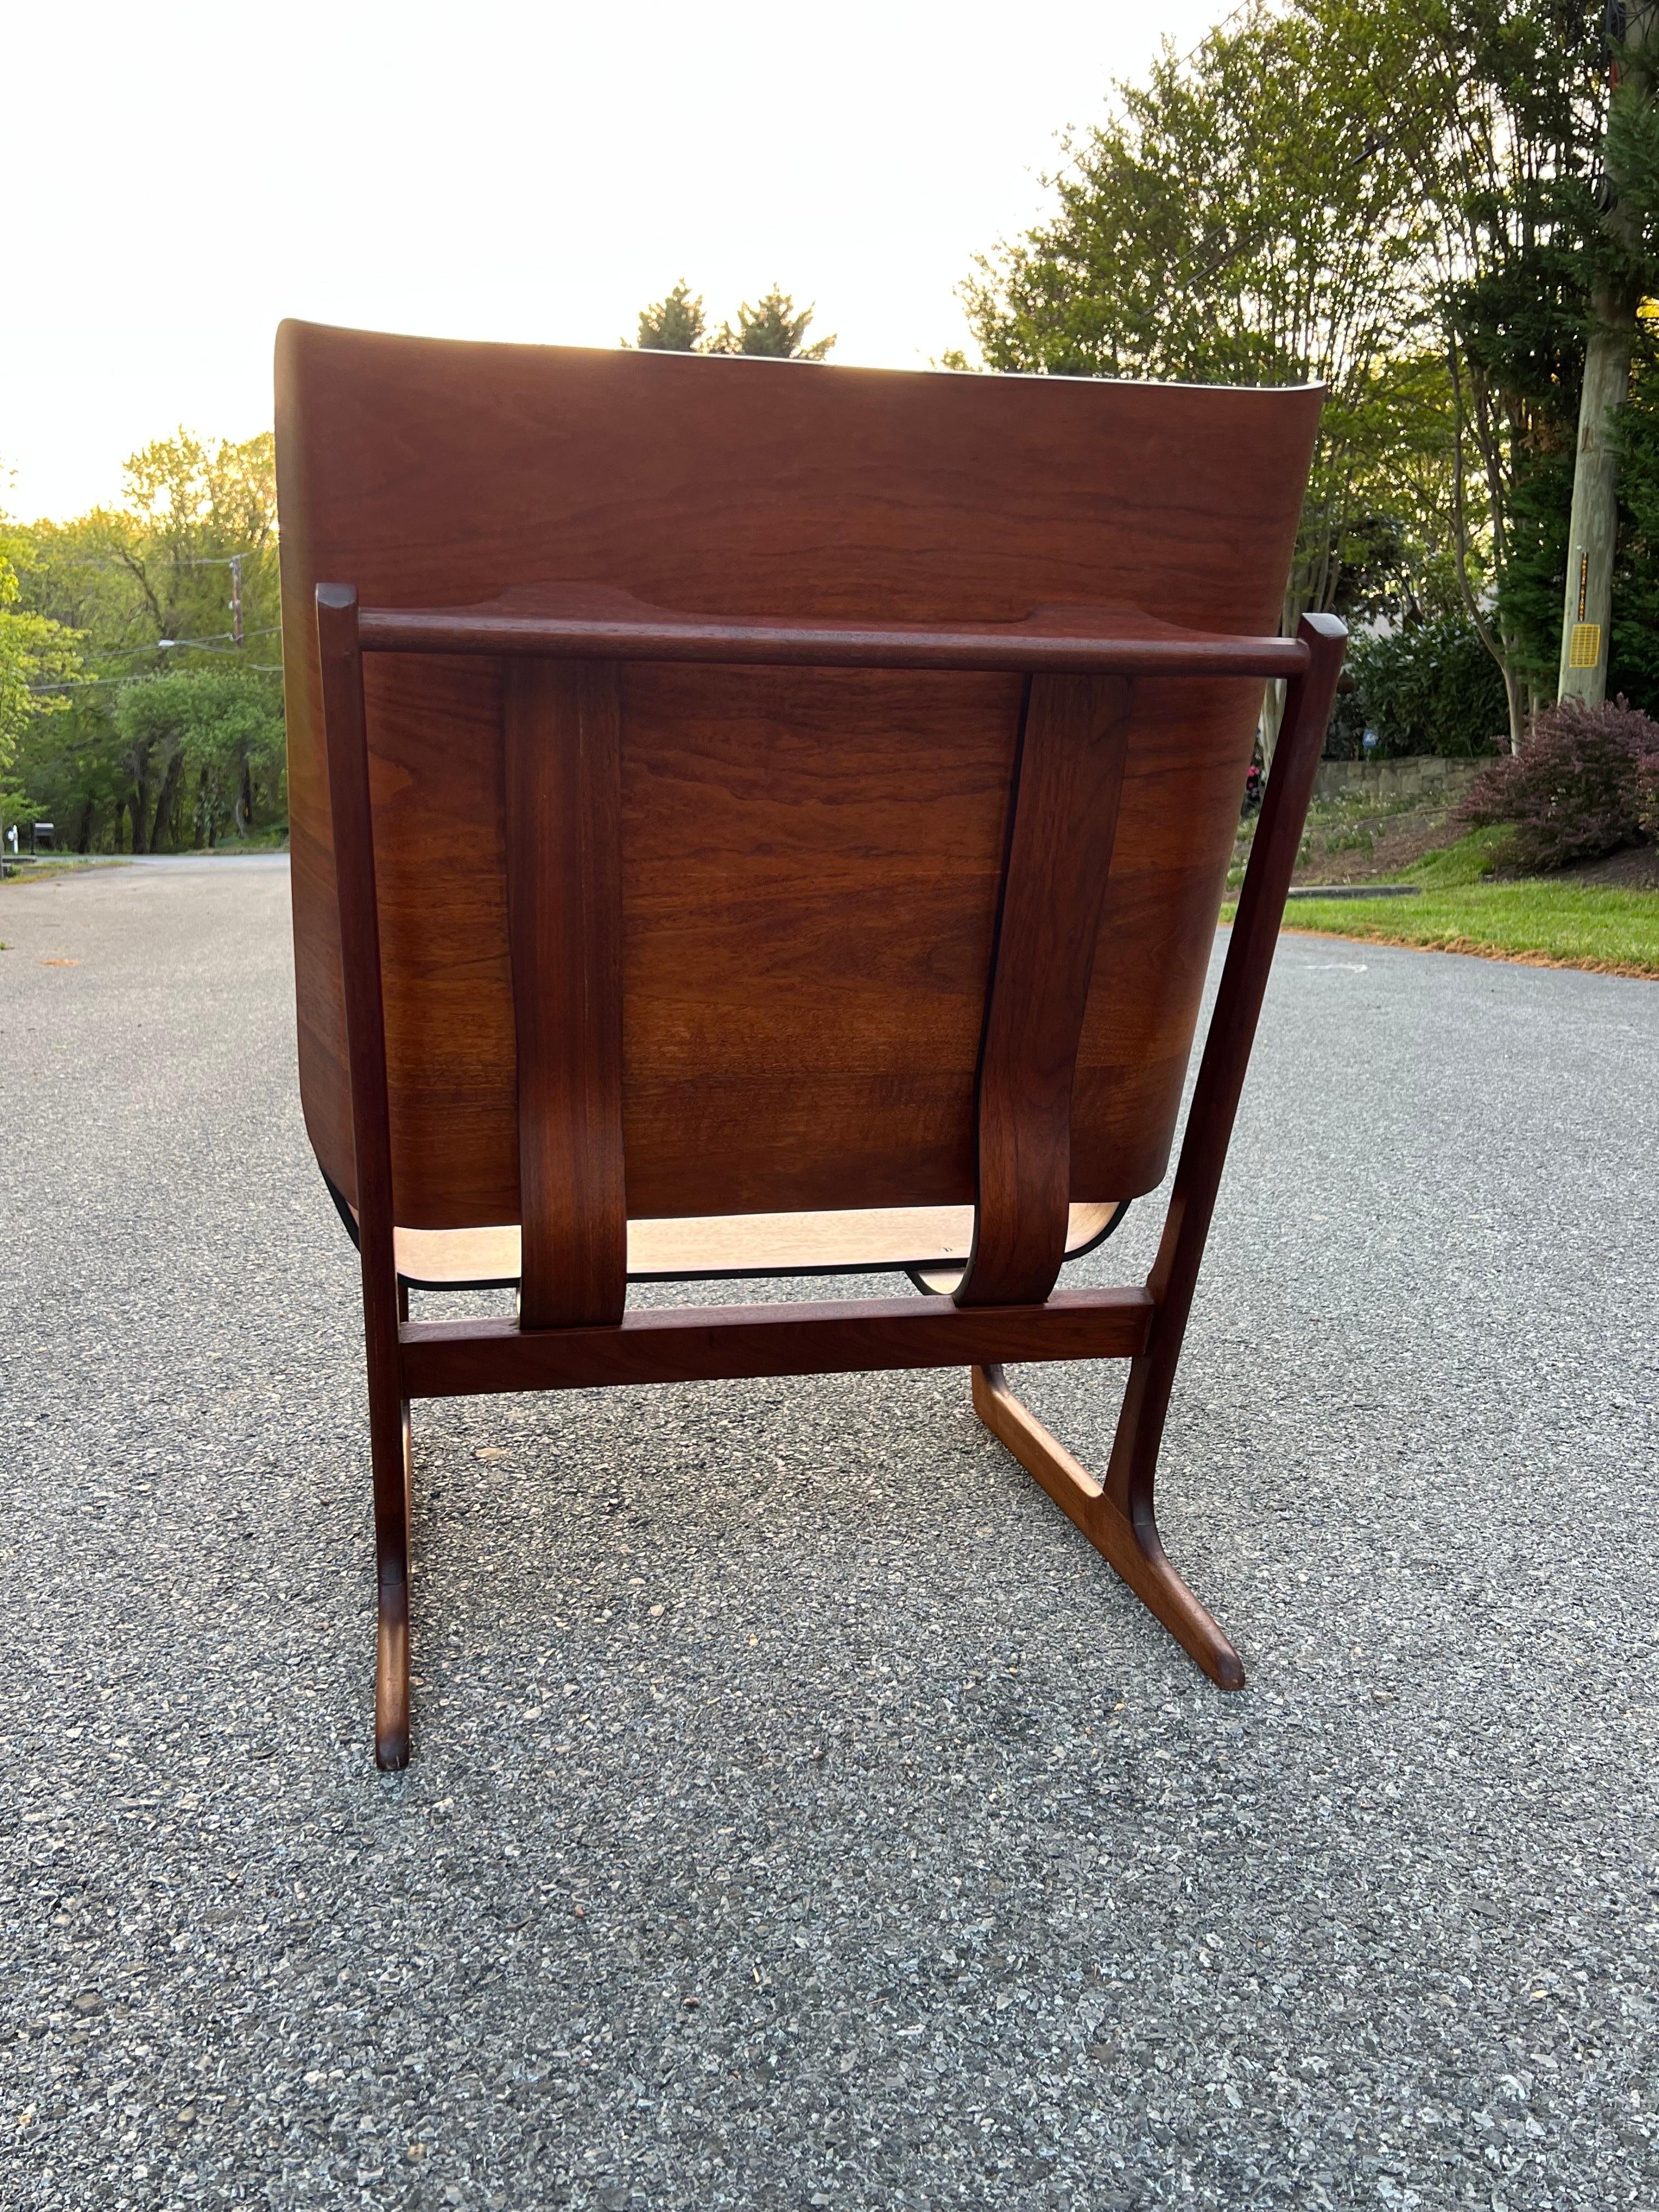 Hans Juergens Deco House Walnut Sled Lounge Chair Grete Jalk 1960s In Good Condition For Sale In Fort Washington, MD